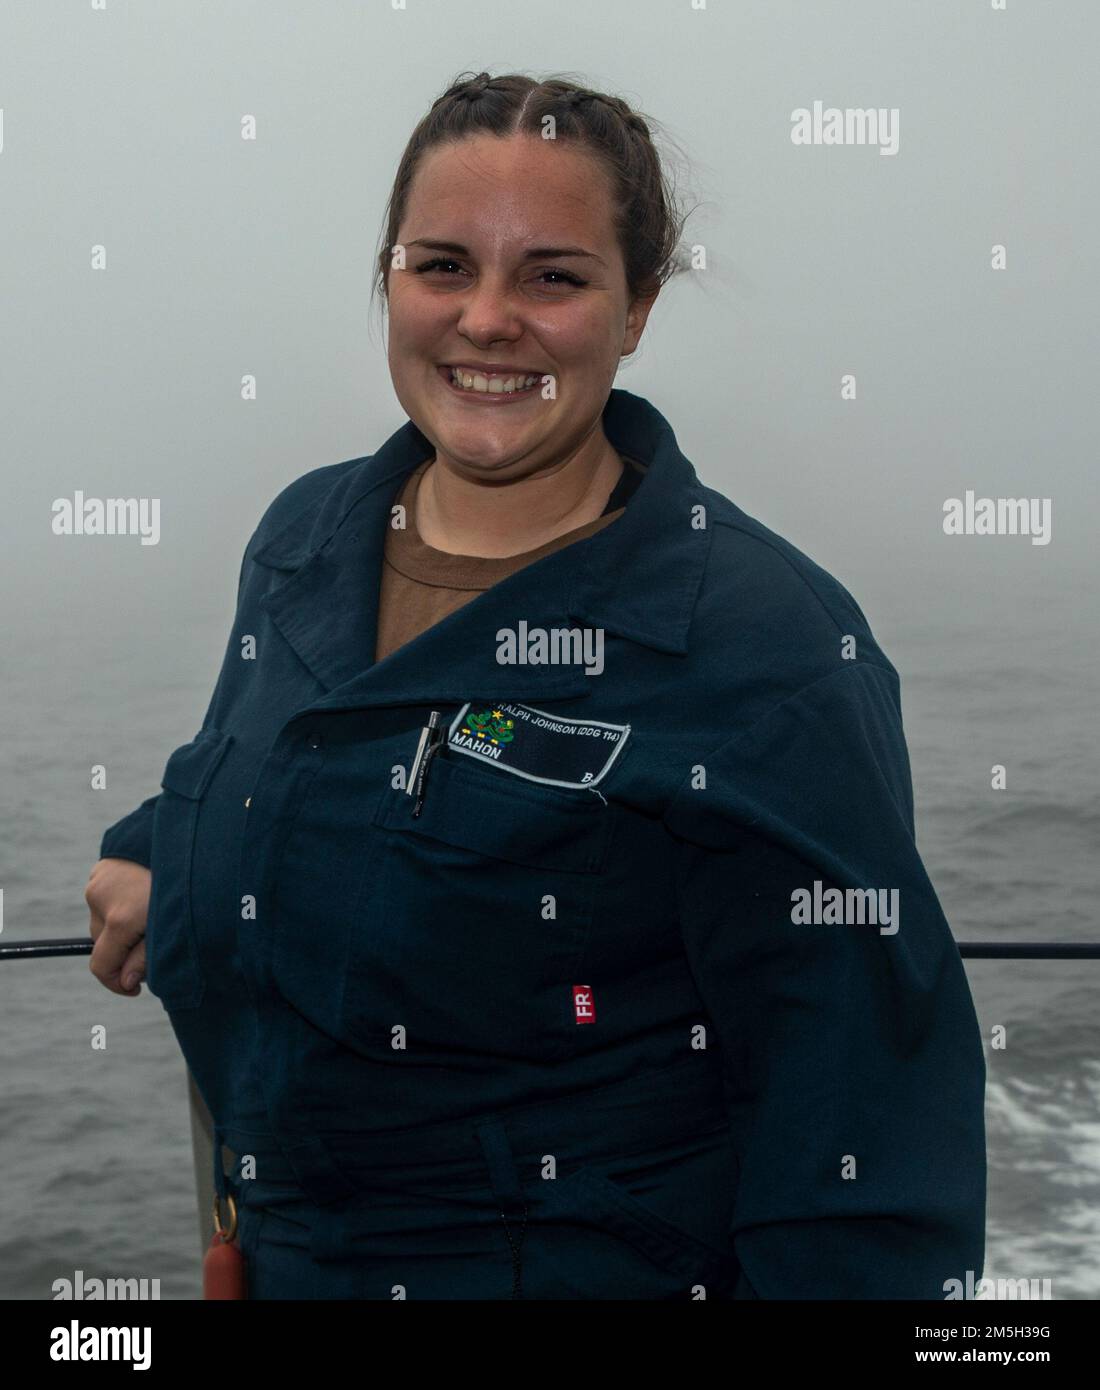 EAST CHINA SEA (March 17, 2022) Logistics Specialist Seaman Bayilee Mahon, from San Diego poses for a photo aboard USS Ralph Johnson (DDG 114). USS Ralph Johnson is assigned to Task Force 71/DESRON 15, the Navy’s largest forward-deployed DESRON and the U.S. 7th fleet’s principal surface force. Stock Photo